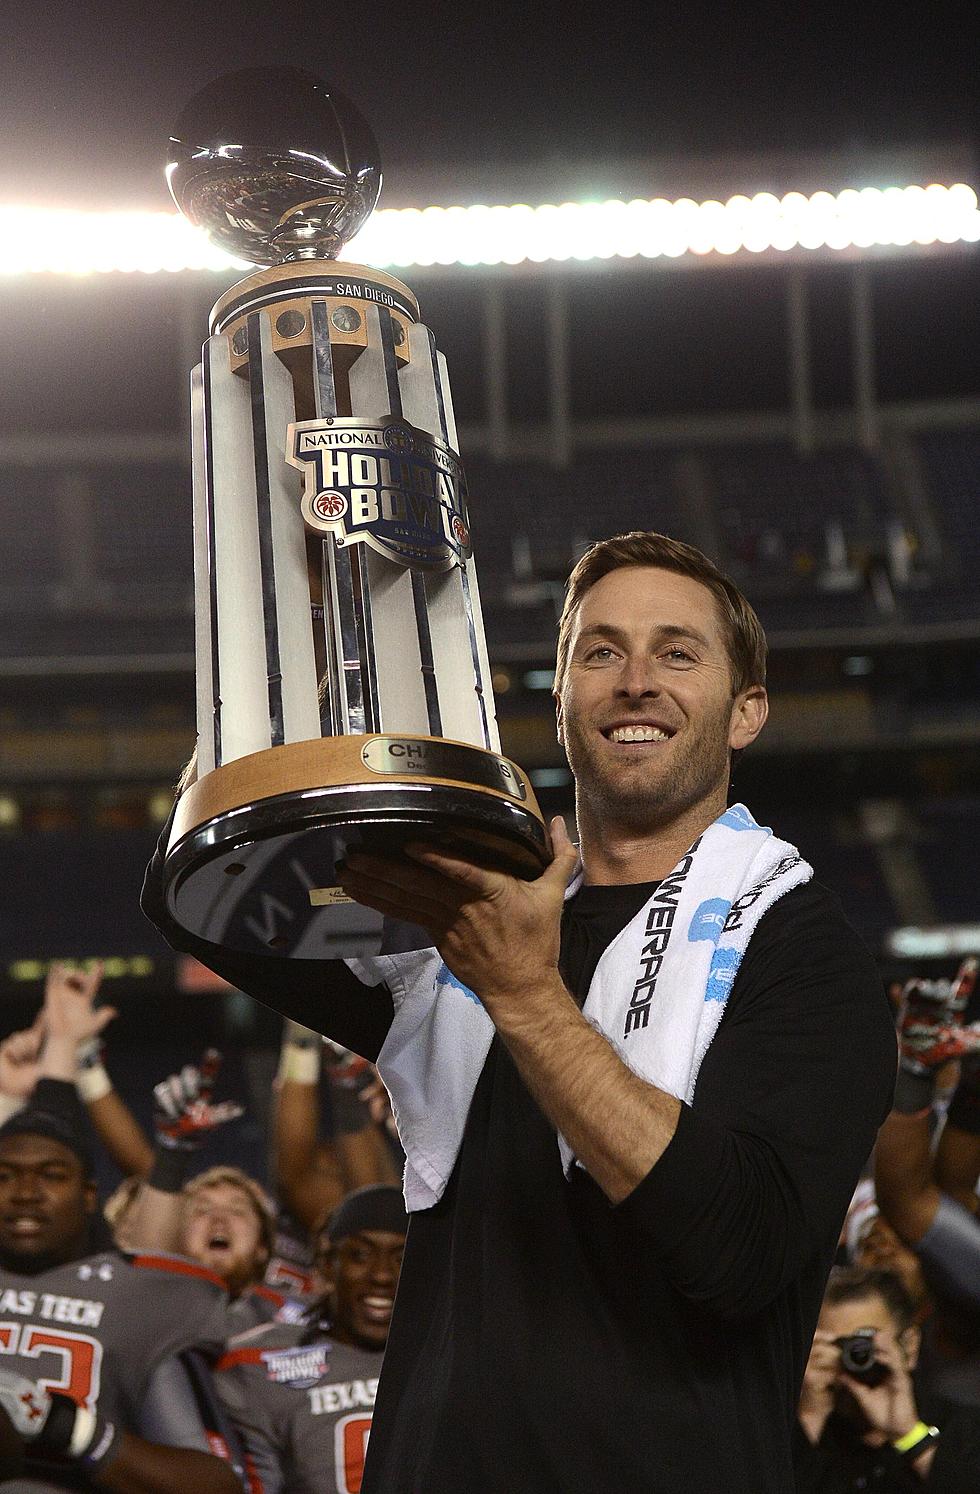 Coach Kliff Kingsbury is In Bed by 9pm and Kicks Off His Day at 4:30am!